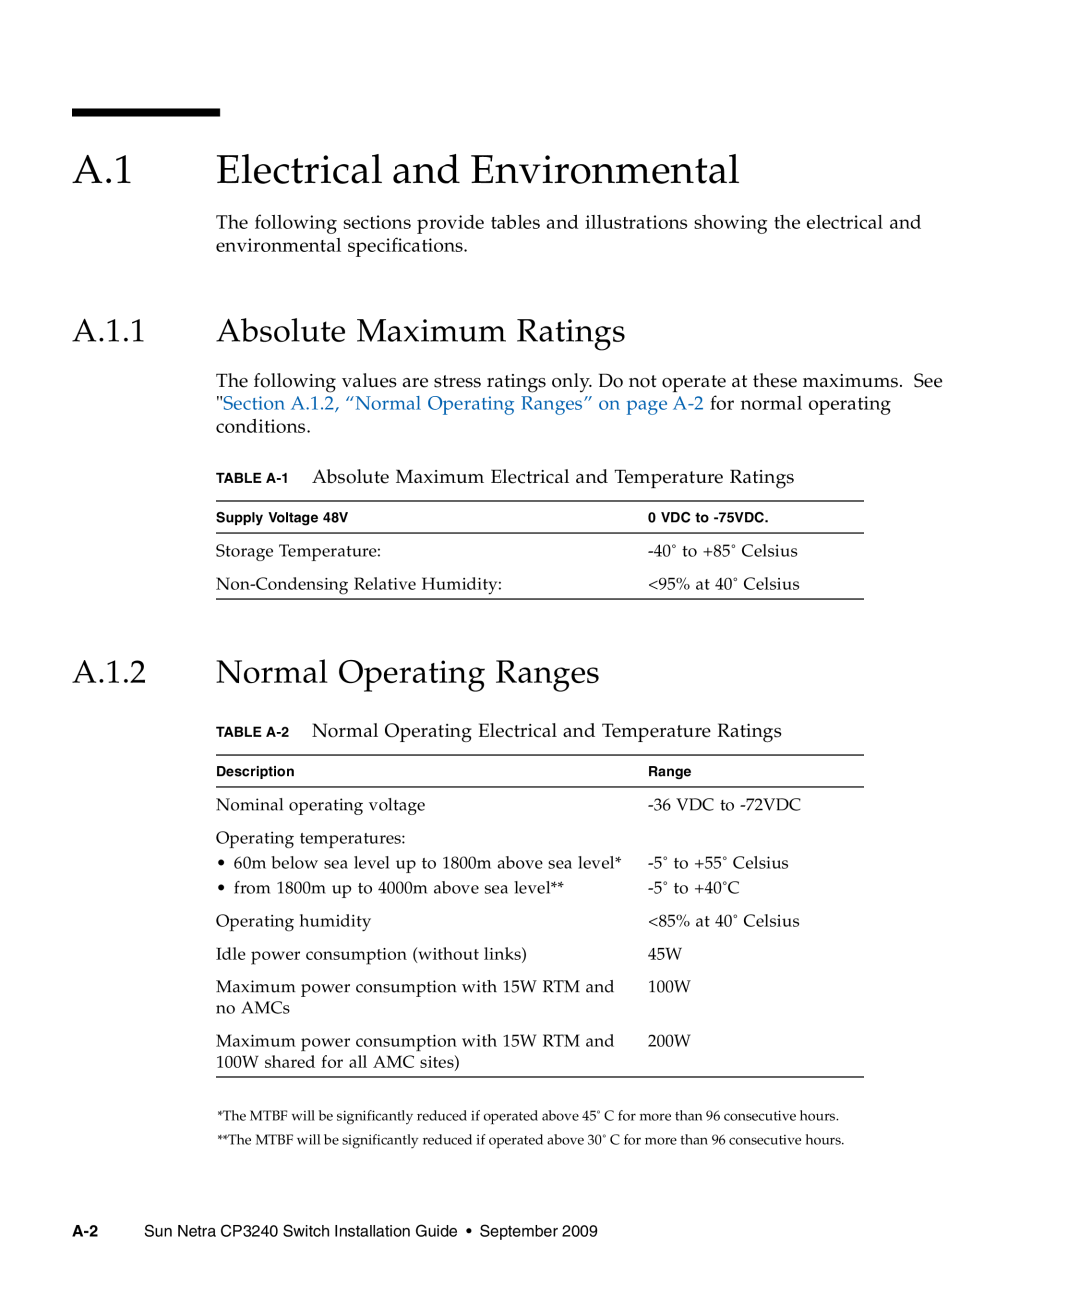 Sun Microsystems CP3240 A.1 Electrical and Environmental, A.1.1 Absolute Maximum Ratings, A.1.2 Normal Operating Ranges 